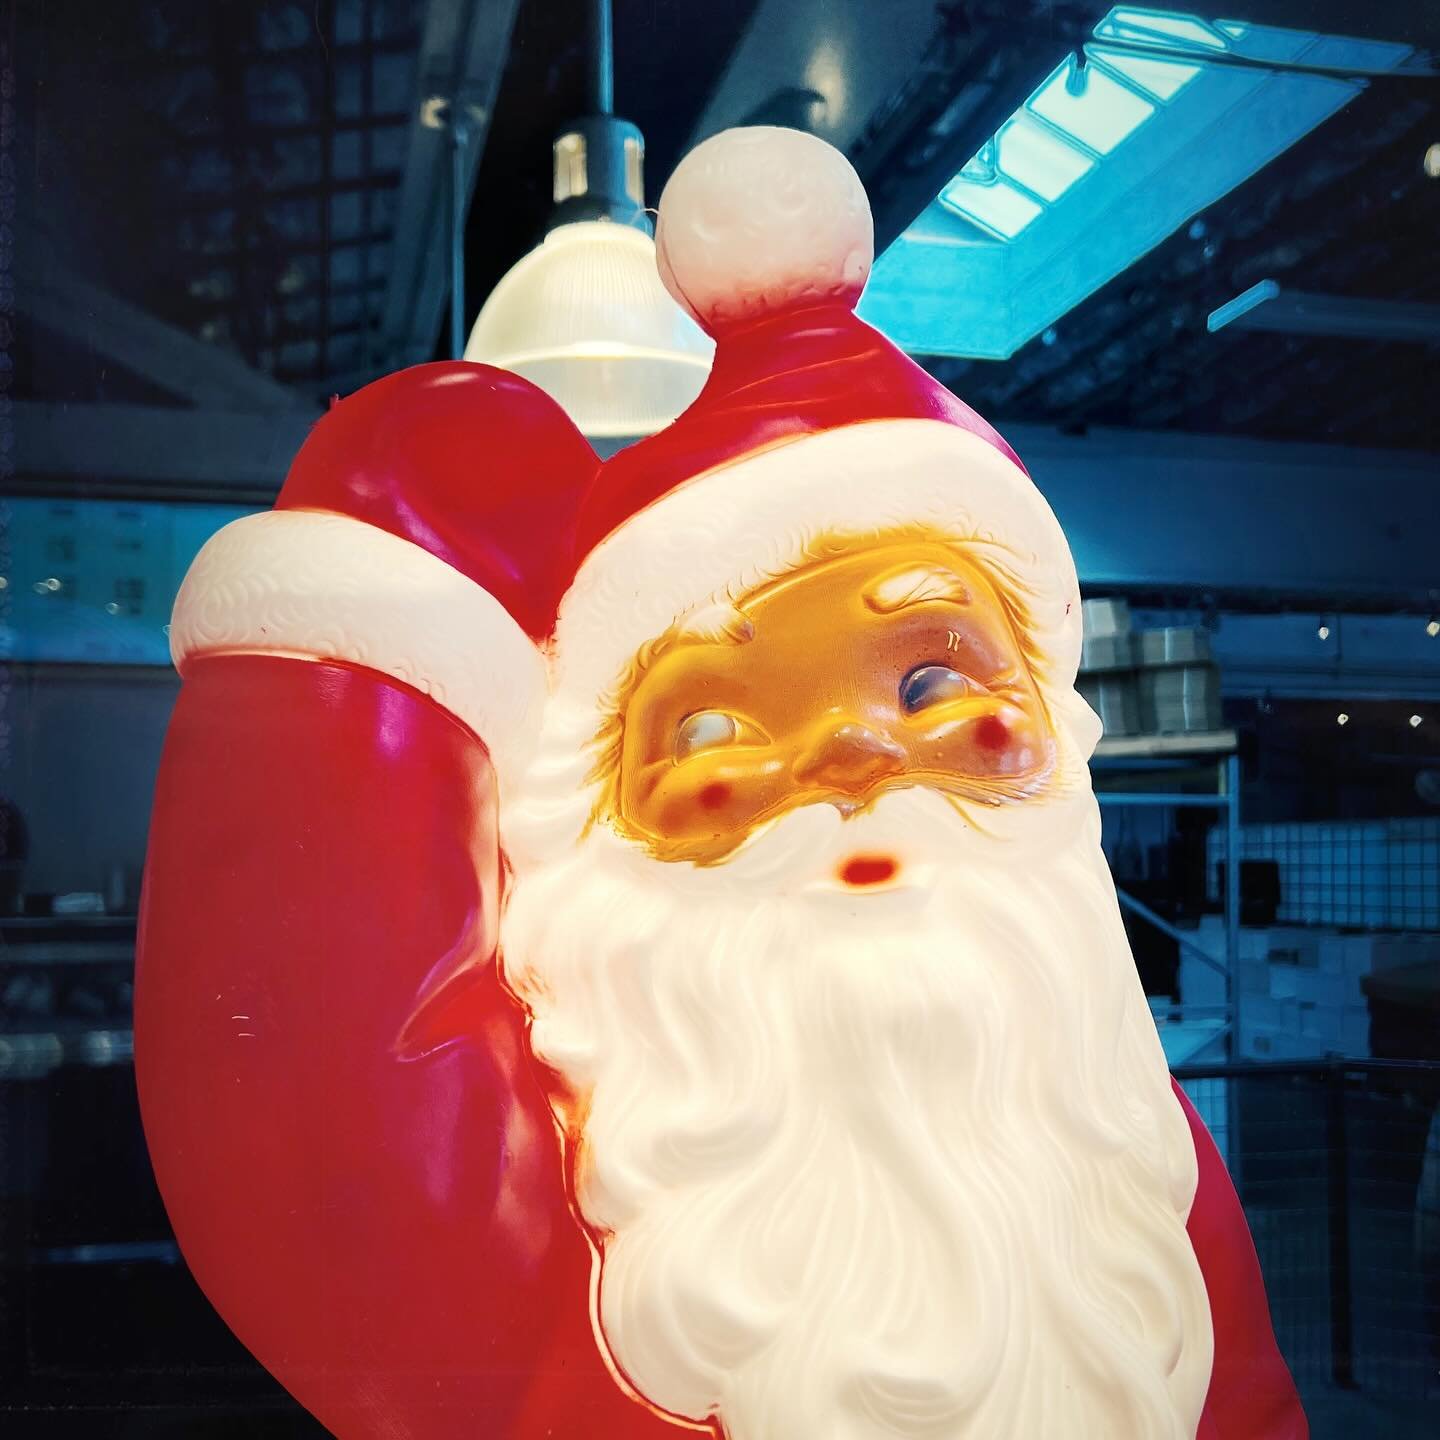 Plastic Santa Says: Get your Ho Ho Ho ass down here and spoil yourself with cocktails and pizza. In that order! ⁣
.⁣
.⁣
.⁣
.⁣
.⁣
#bar #bartender #beer #cheers #cocktail #cocktails #drink #drinks #drinkstagram #drinkup #food #foodblog #foodblogger #fo